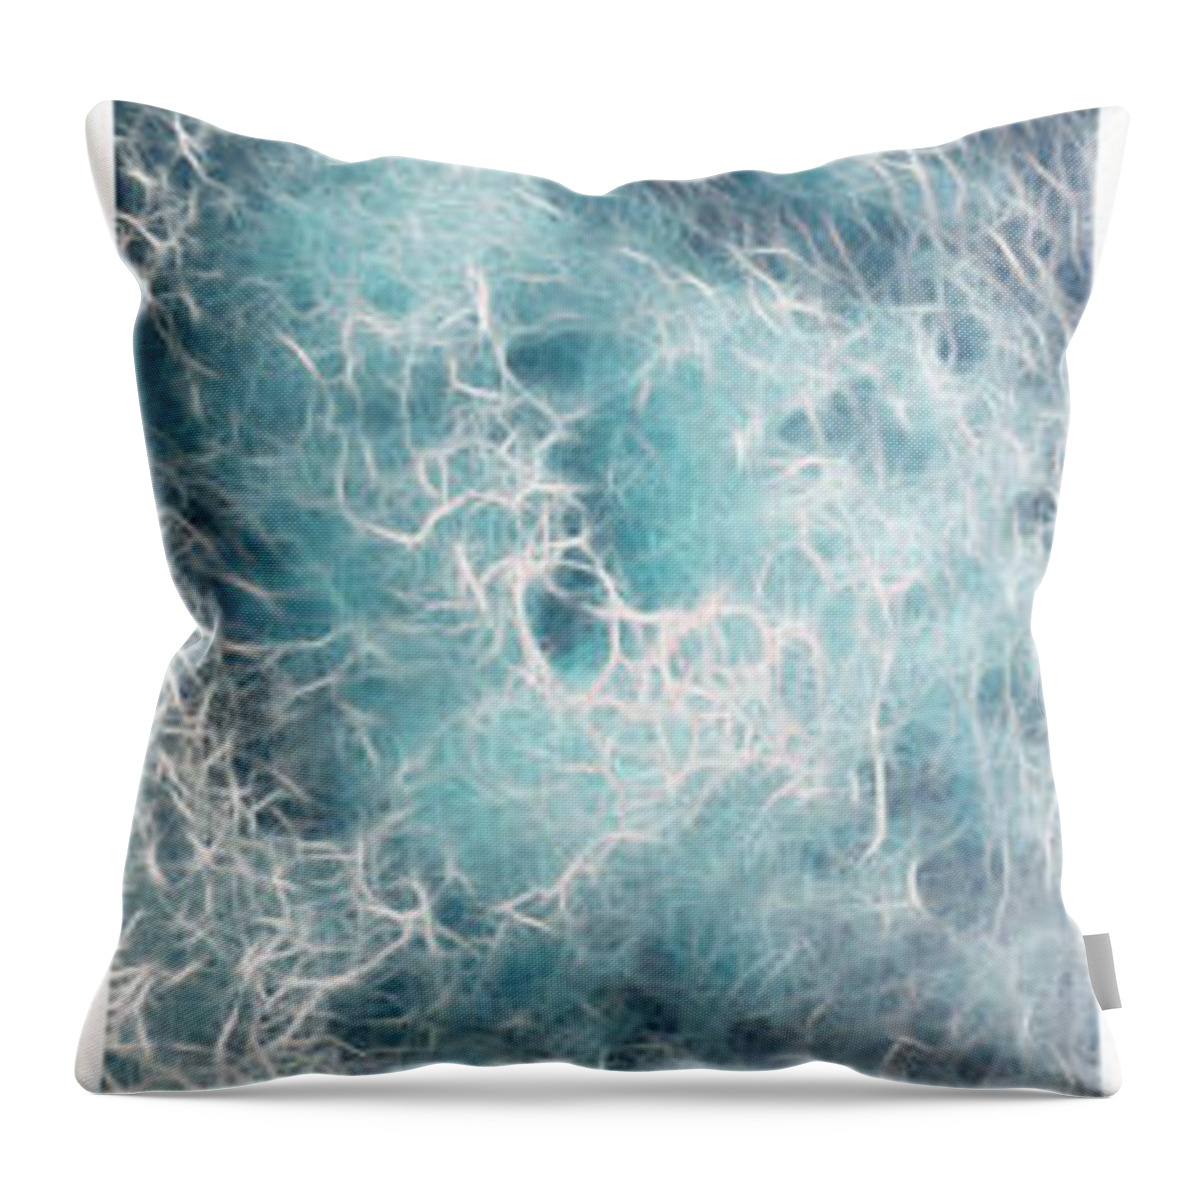 Abstract Throw Pillow featuring the photograph Caribbean Waters - Triptych Image Vertical by Jason Freedman